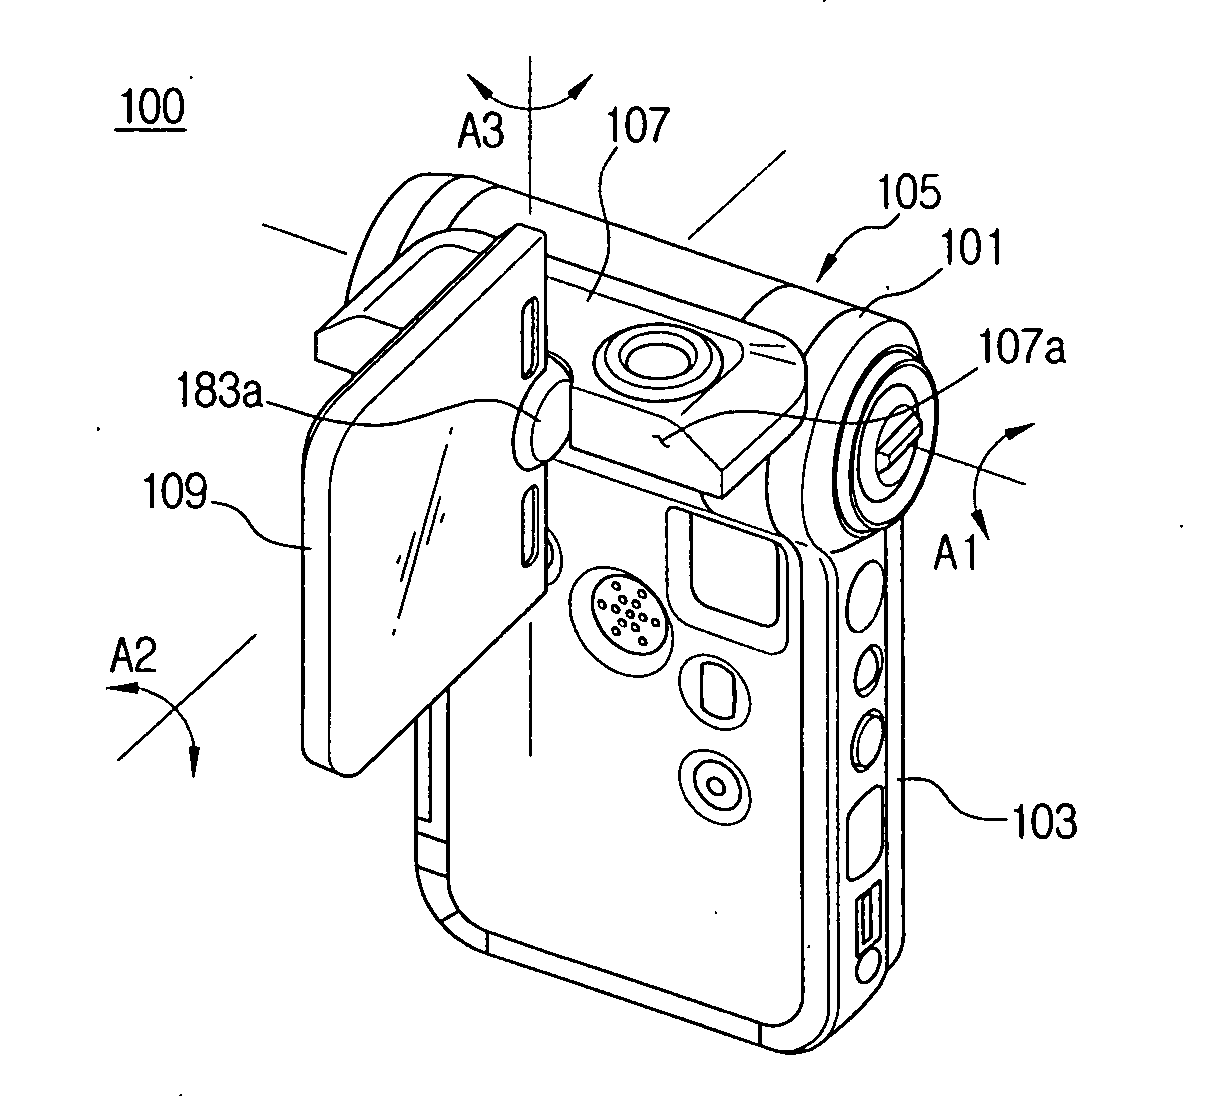 Portable electronic device having triaxial hinge structure